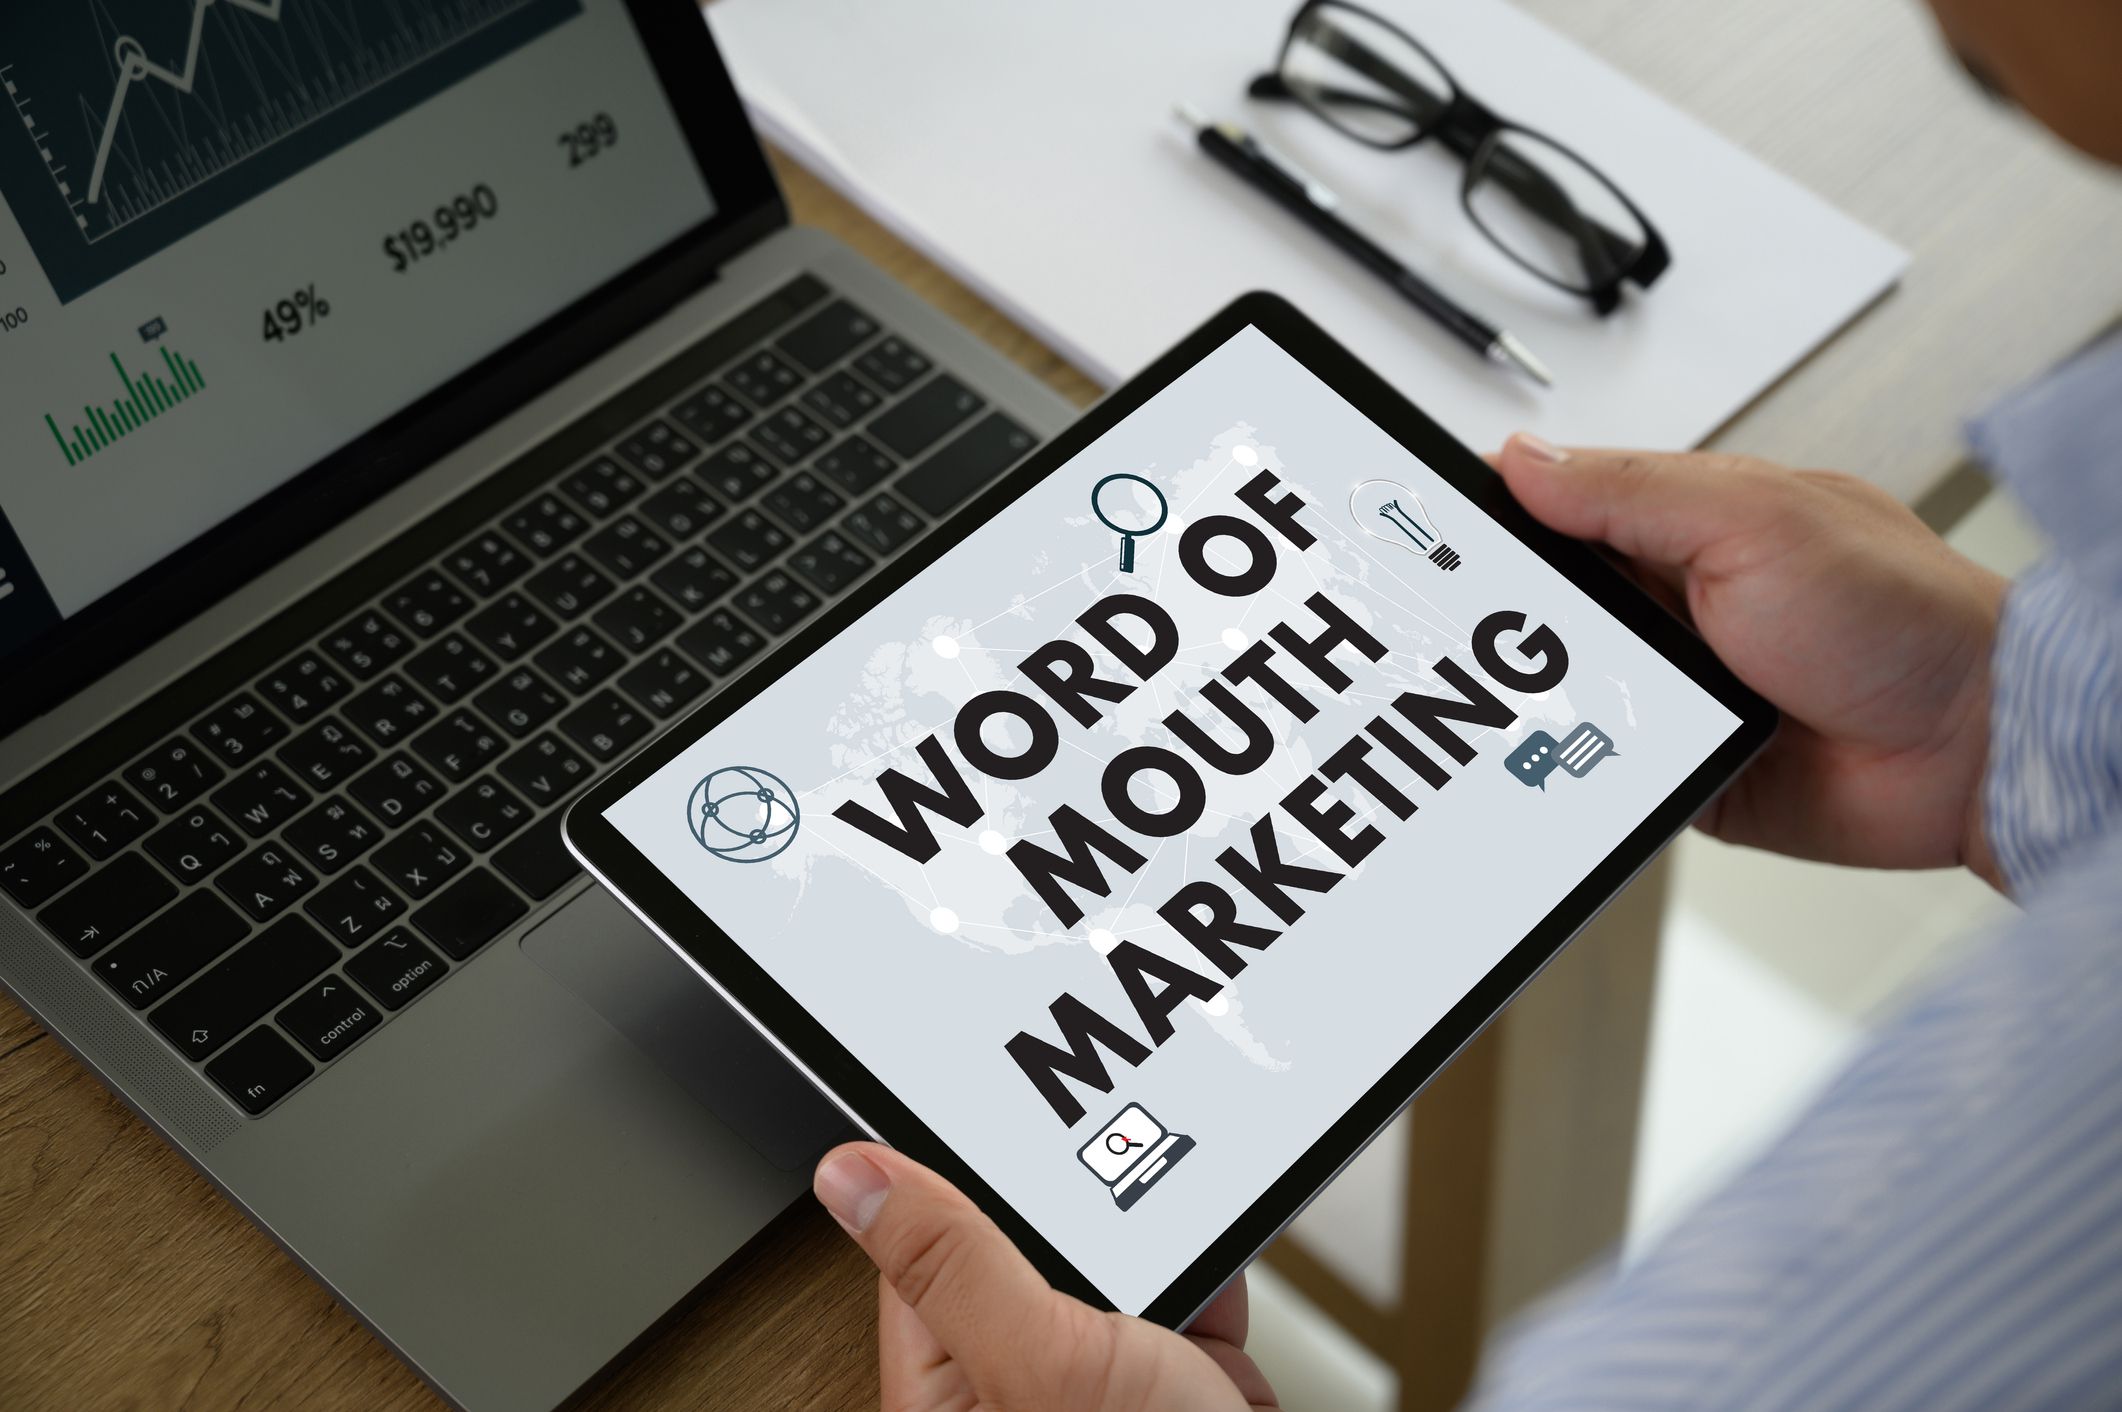 Word of mouth marketing